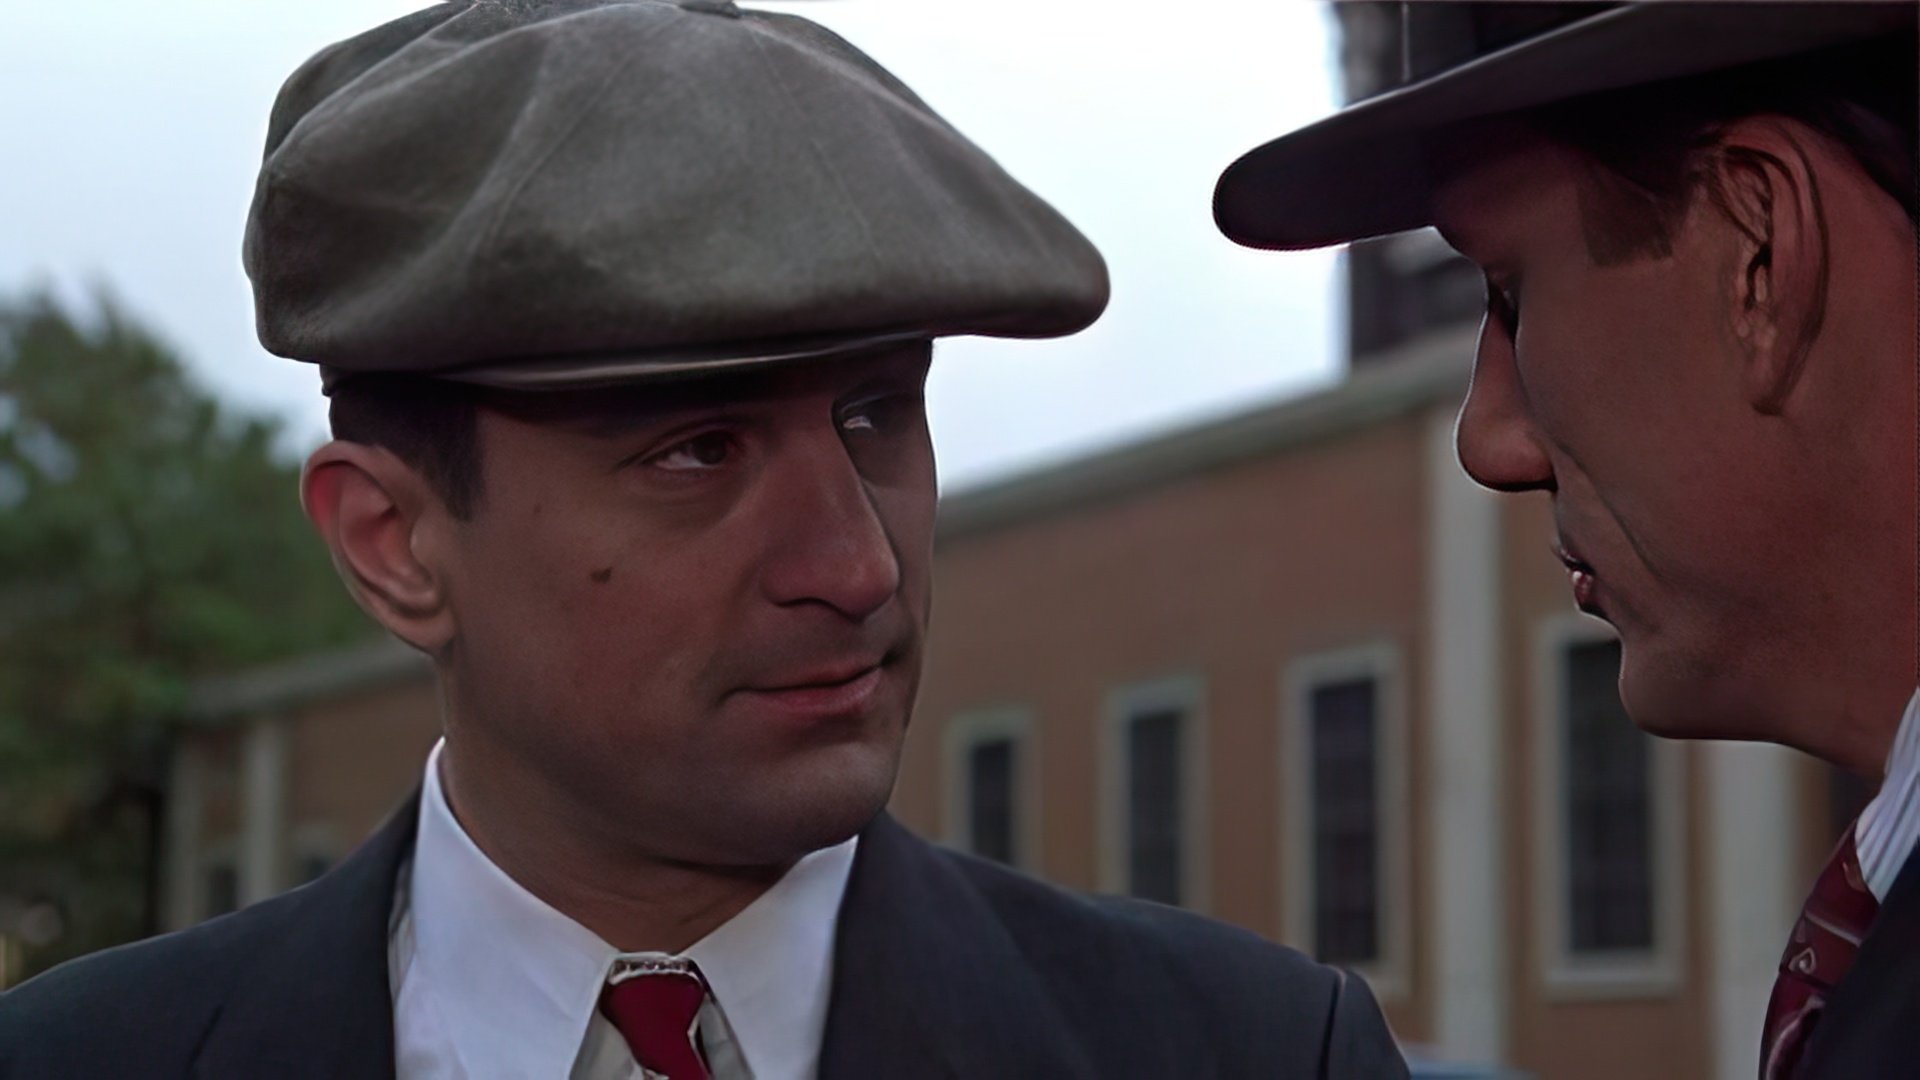 Robert De Niro in the movie 'Once Upon a Time in America'